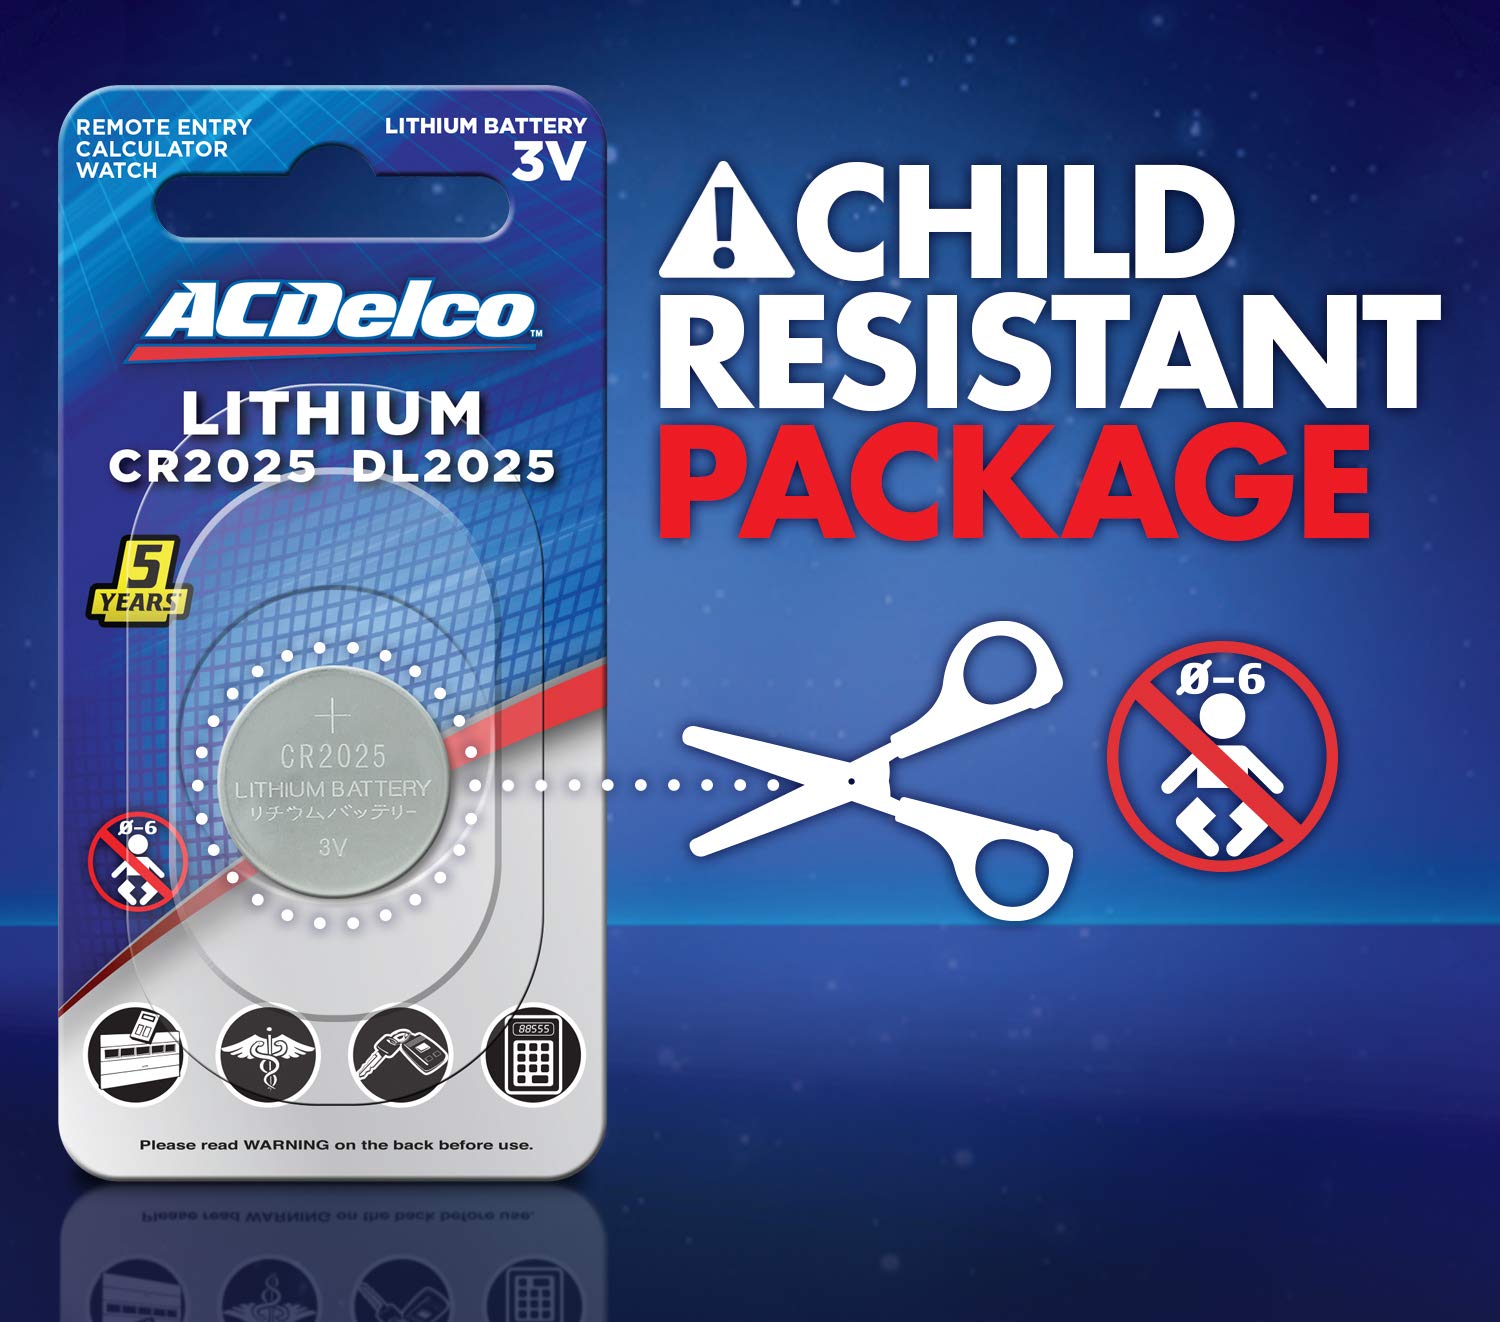 ACDelco CR2025 3V Lithium Coin Cell Battery, Watch and Electronics Button Batteries, 6-Count